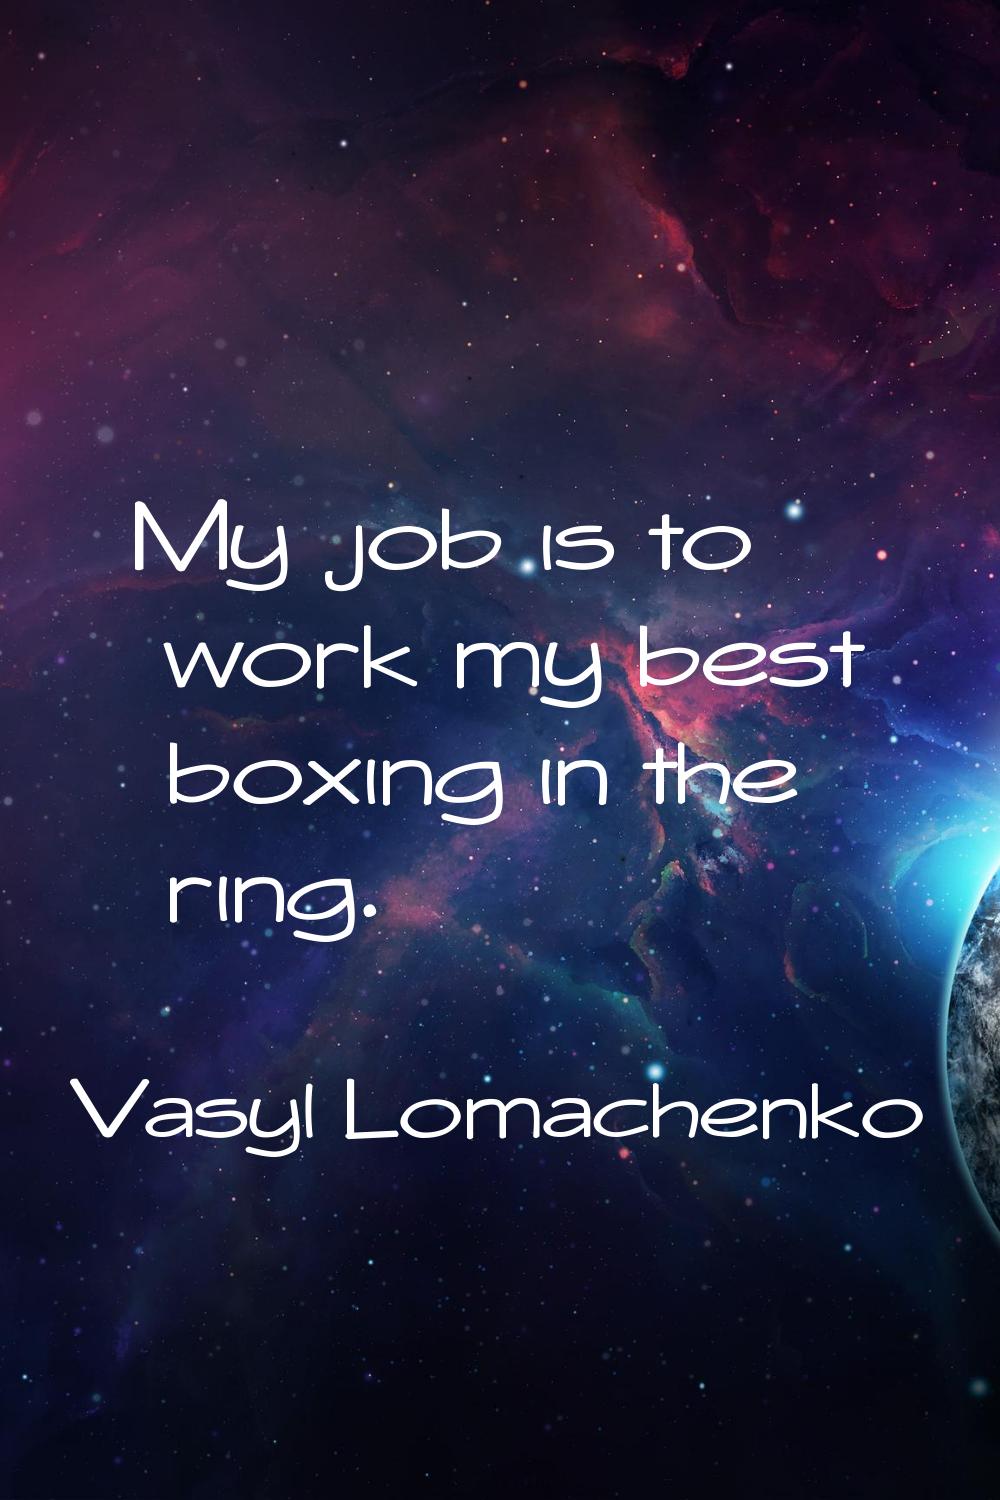 My job is to work my best boxing in the ring.